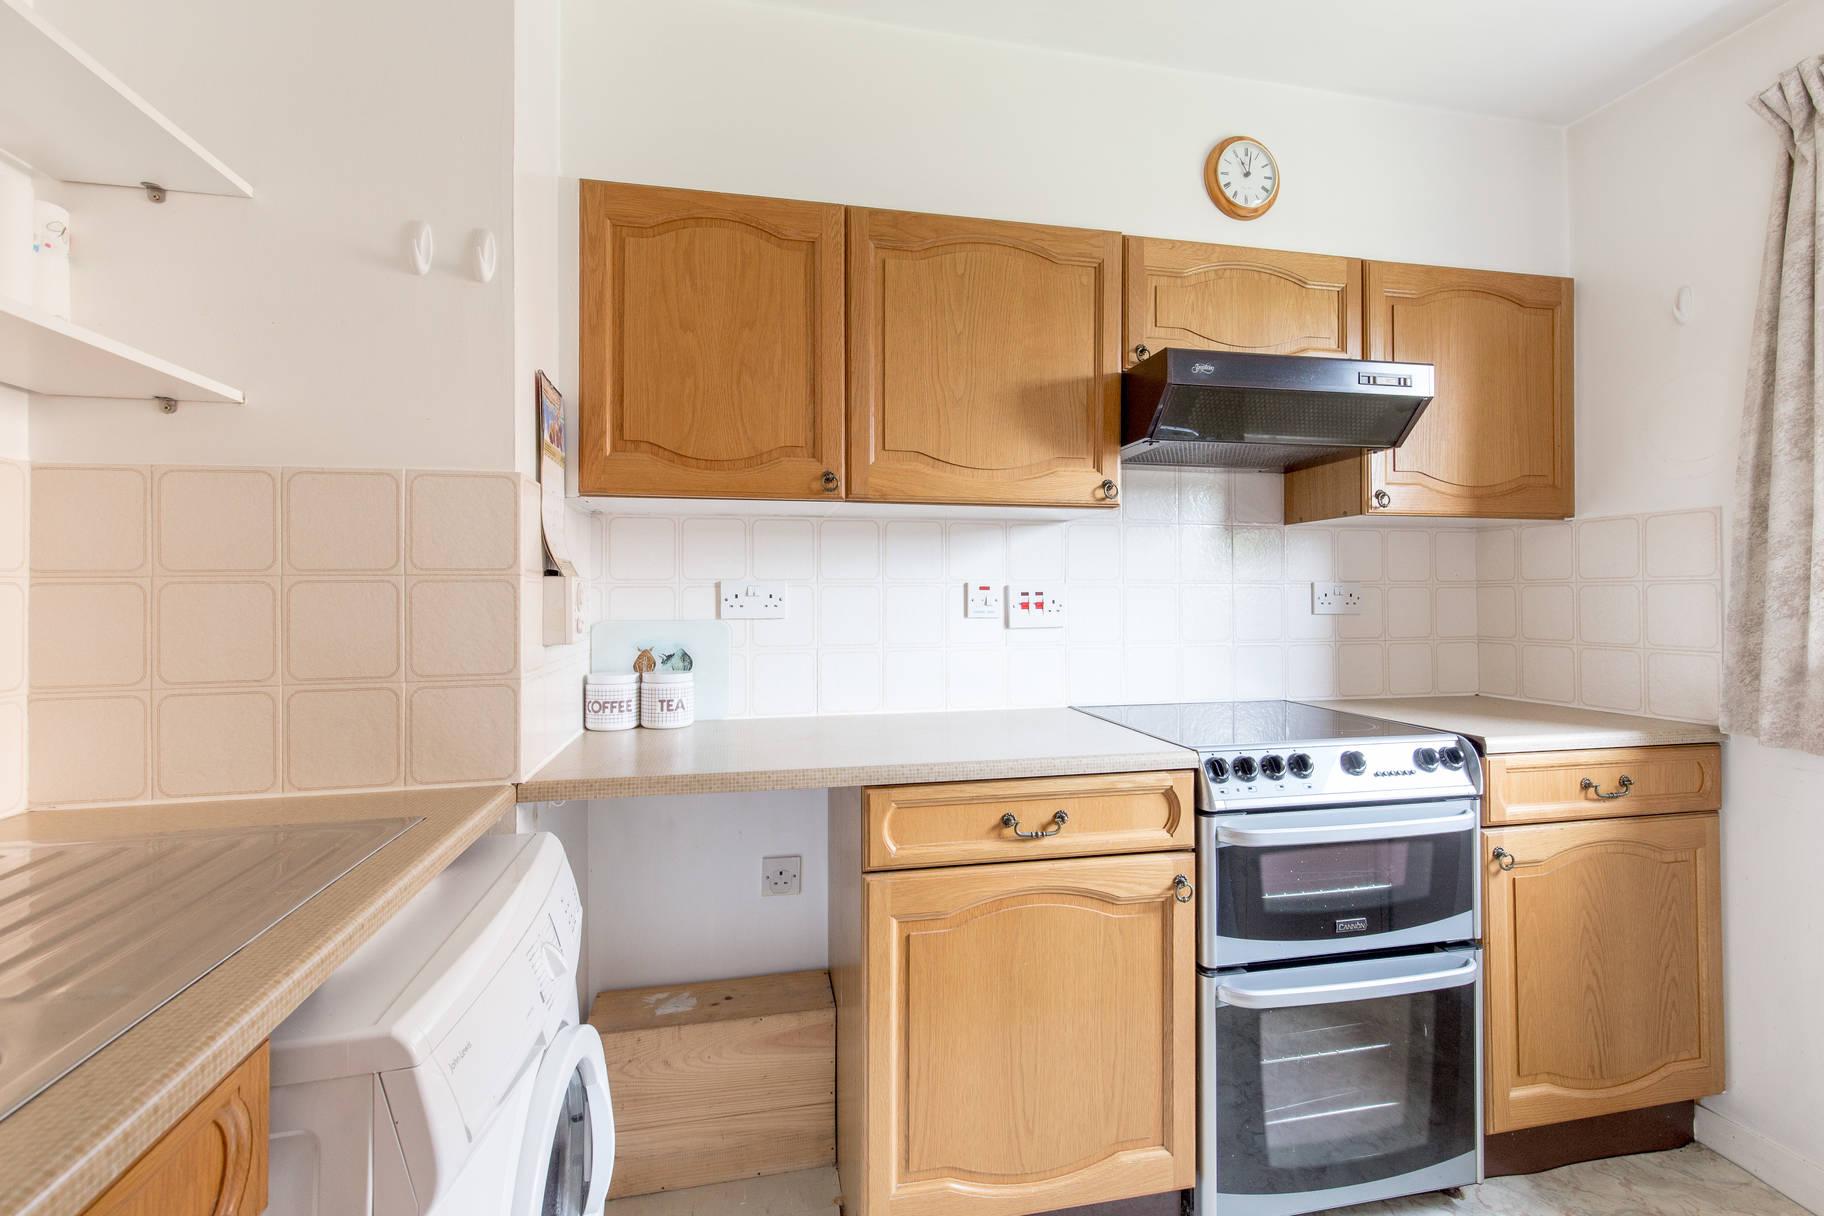 Flat 217, 173 Carlyle Court, Comely Bank Road, Edinburgh, EH4 1DH